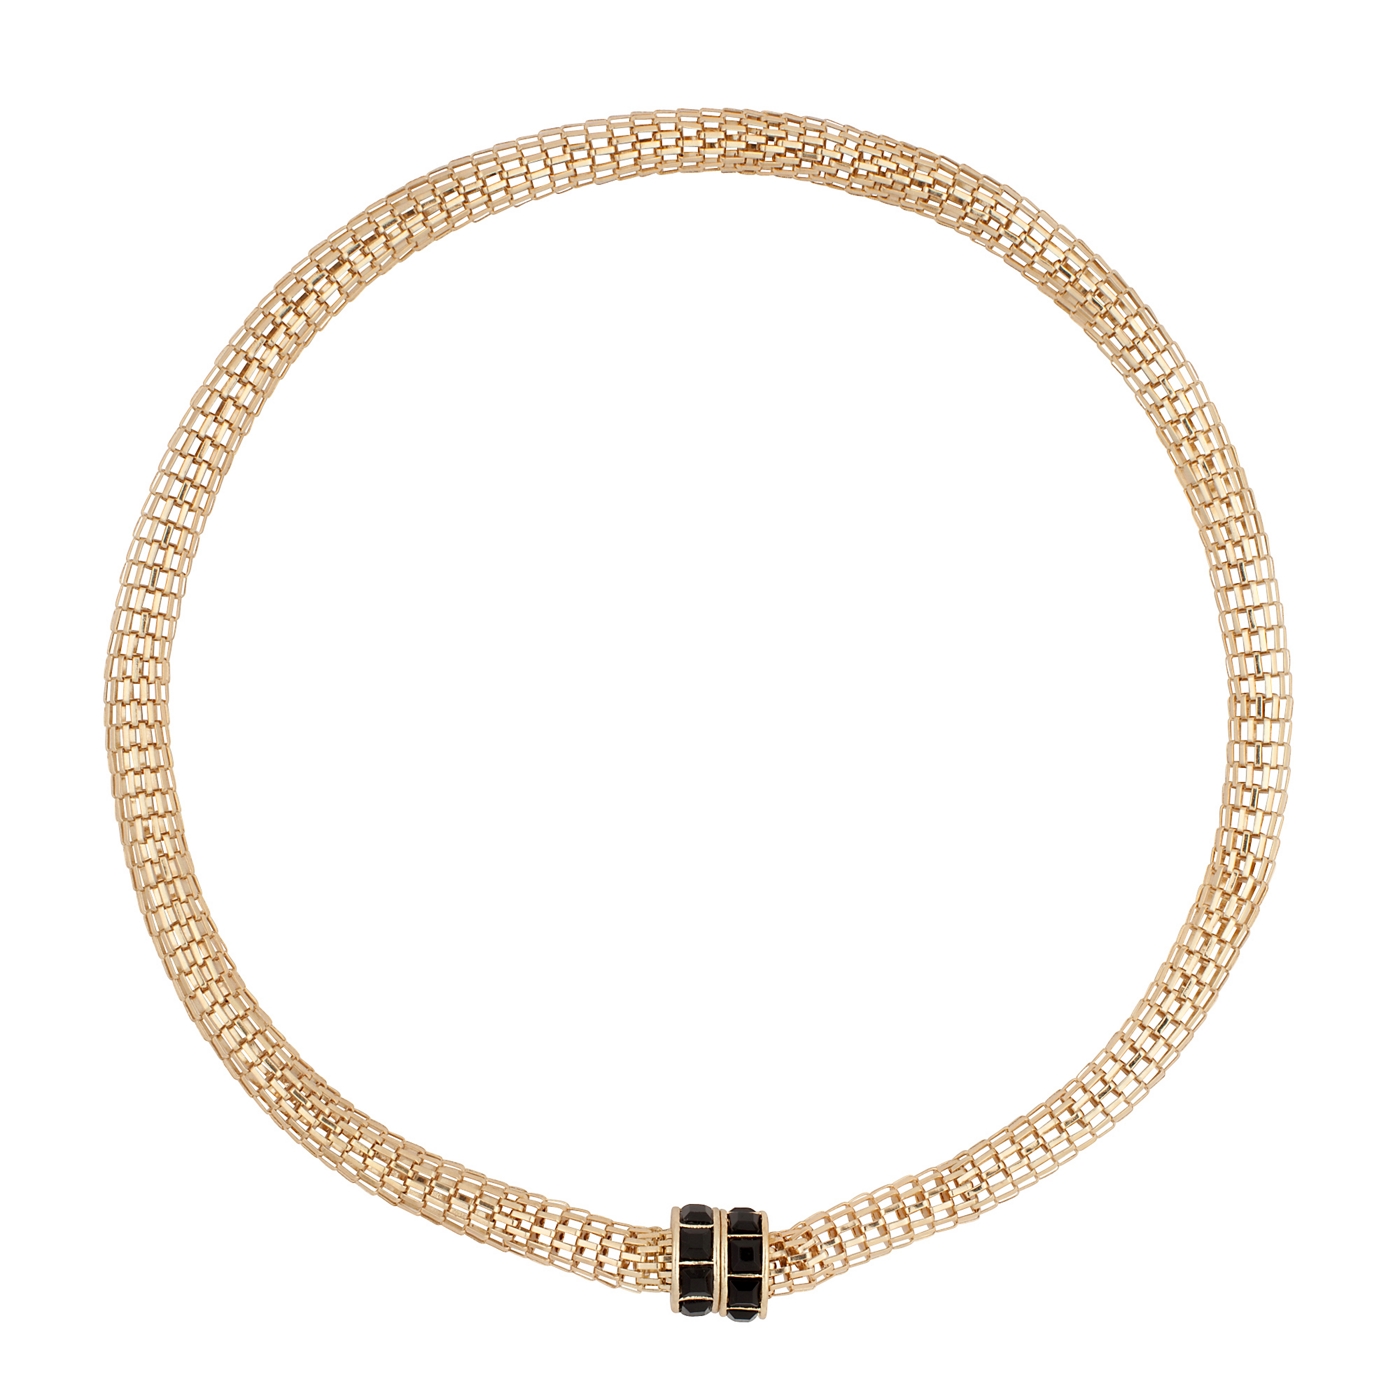 Principles by Ben de Lisi Jet panel and gold mesh short magnetic necklace